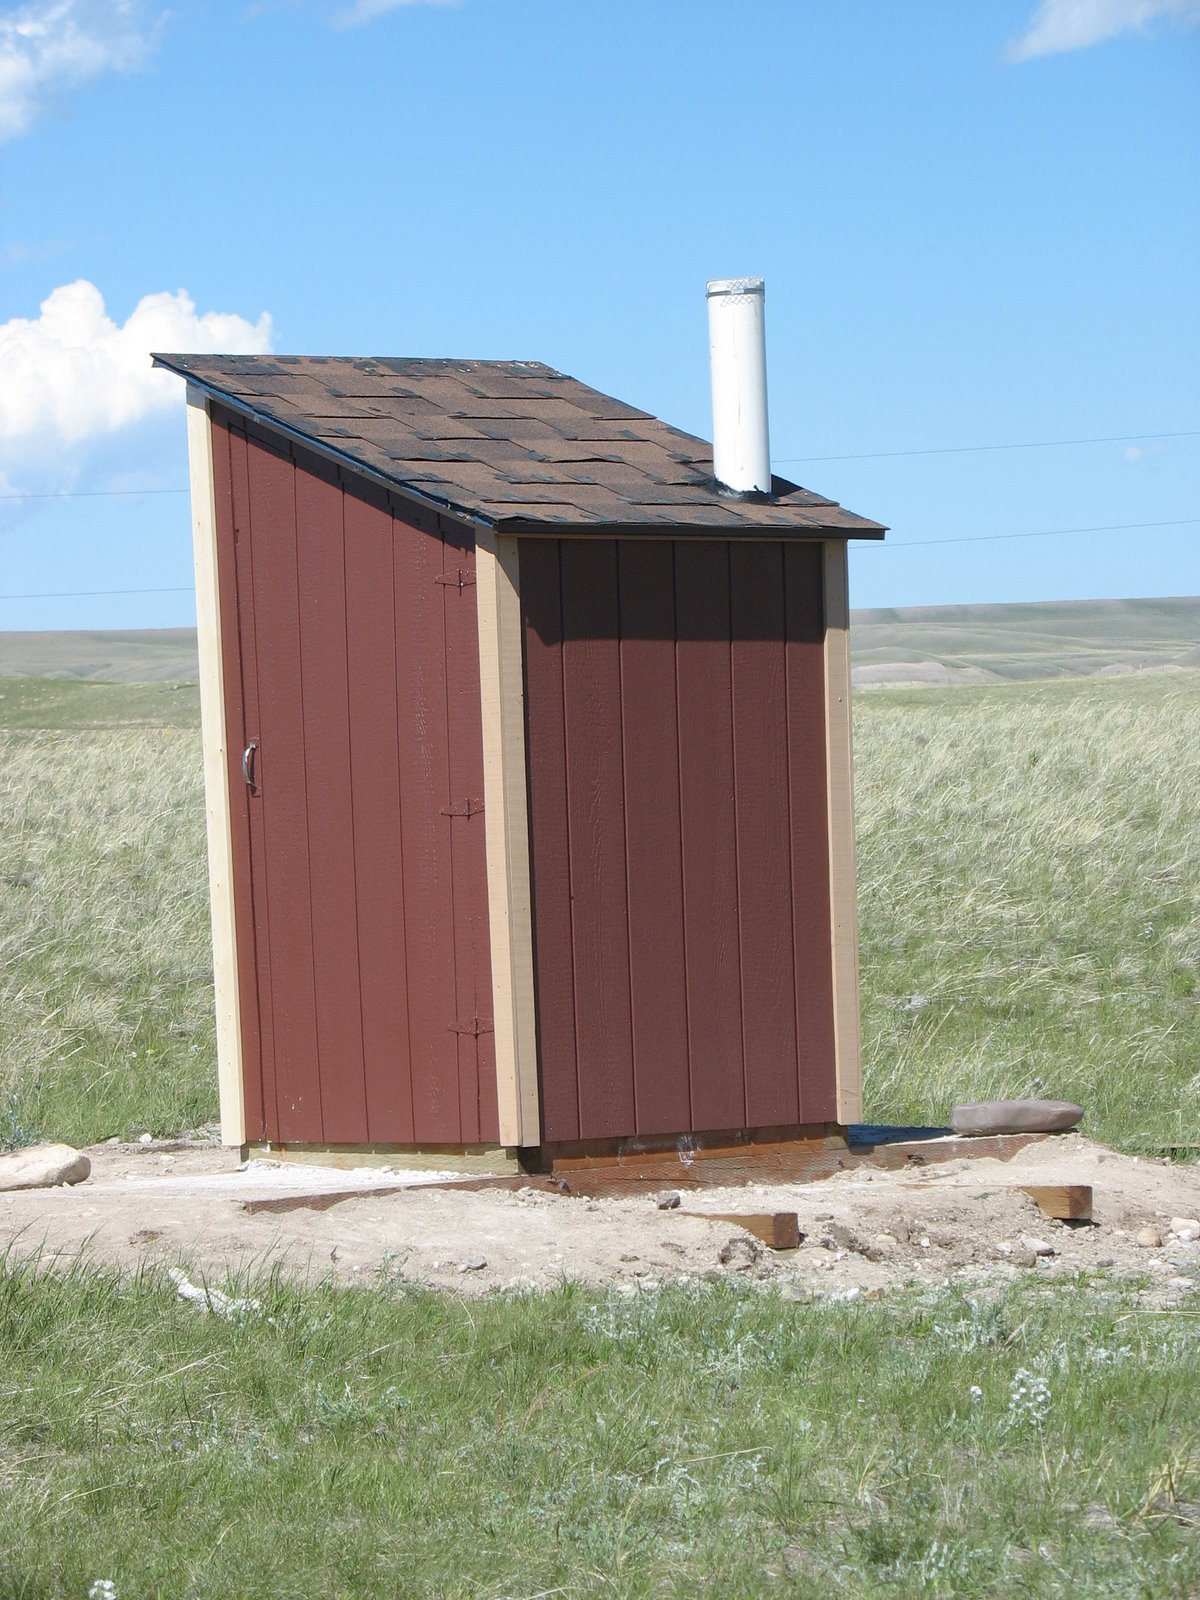 [Cabin+outhouse+034.JPG]